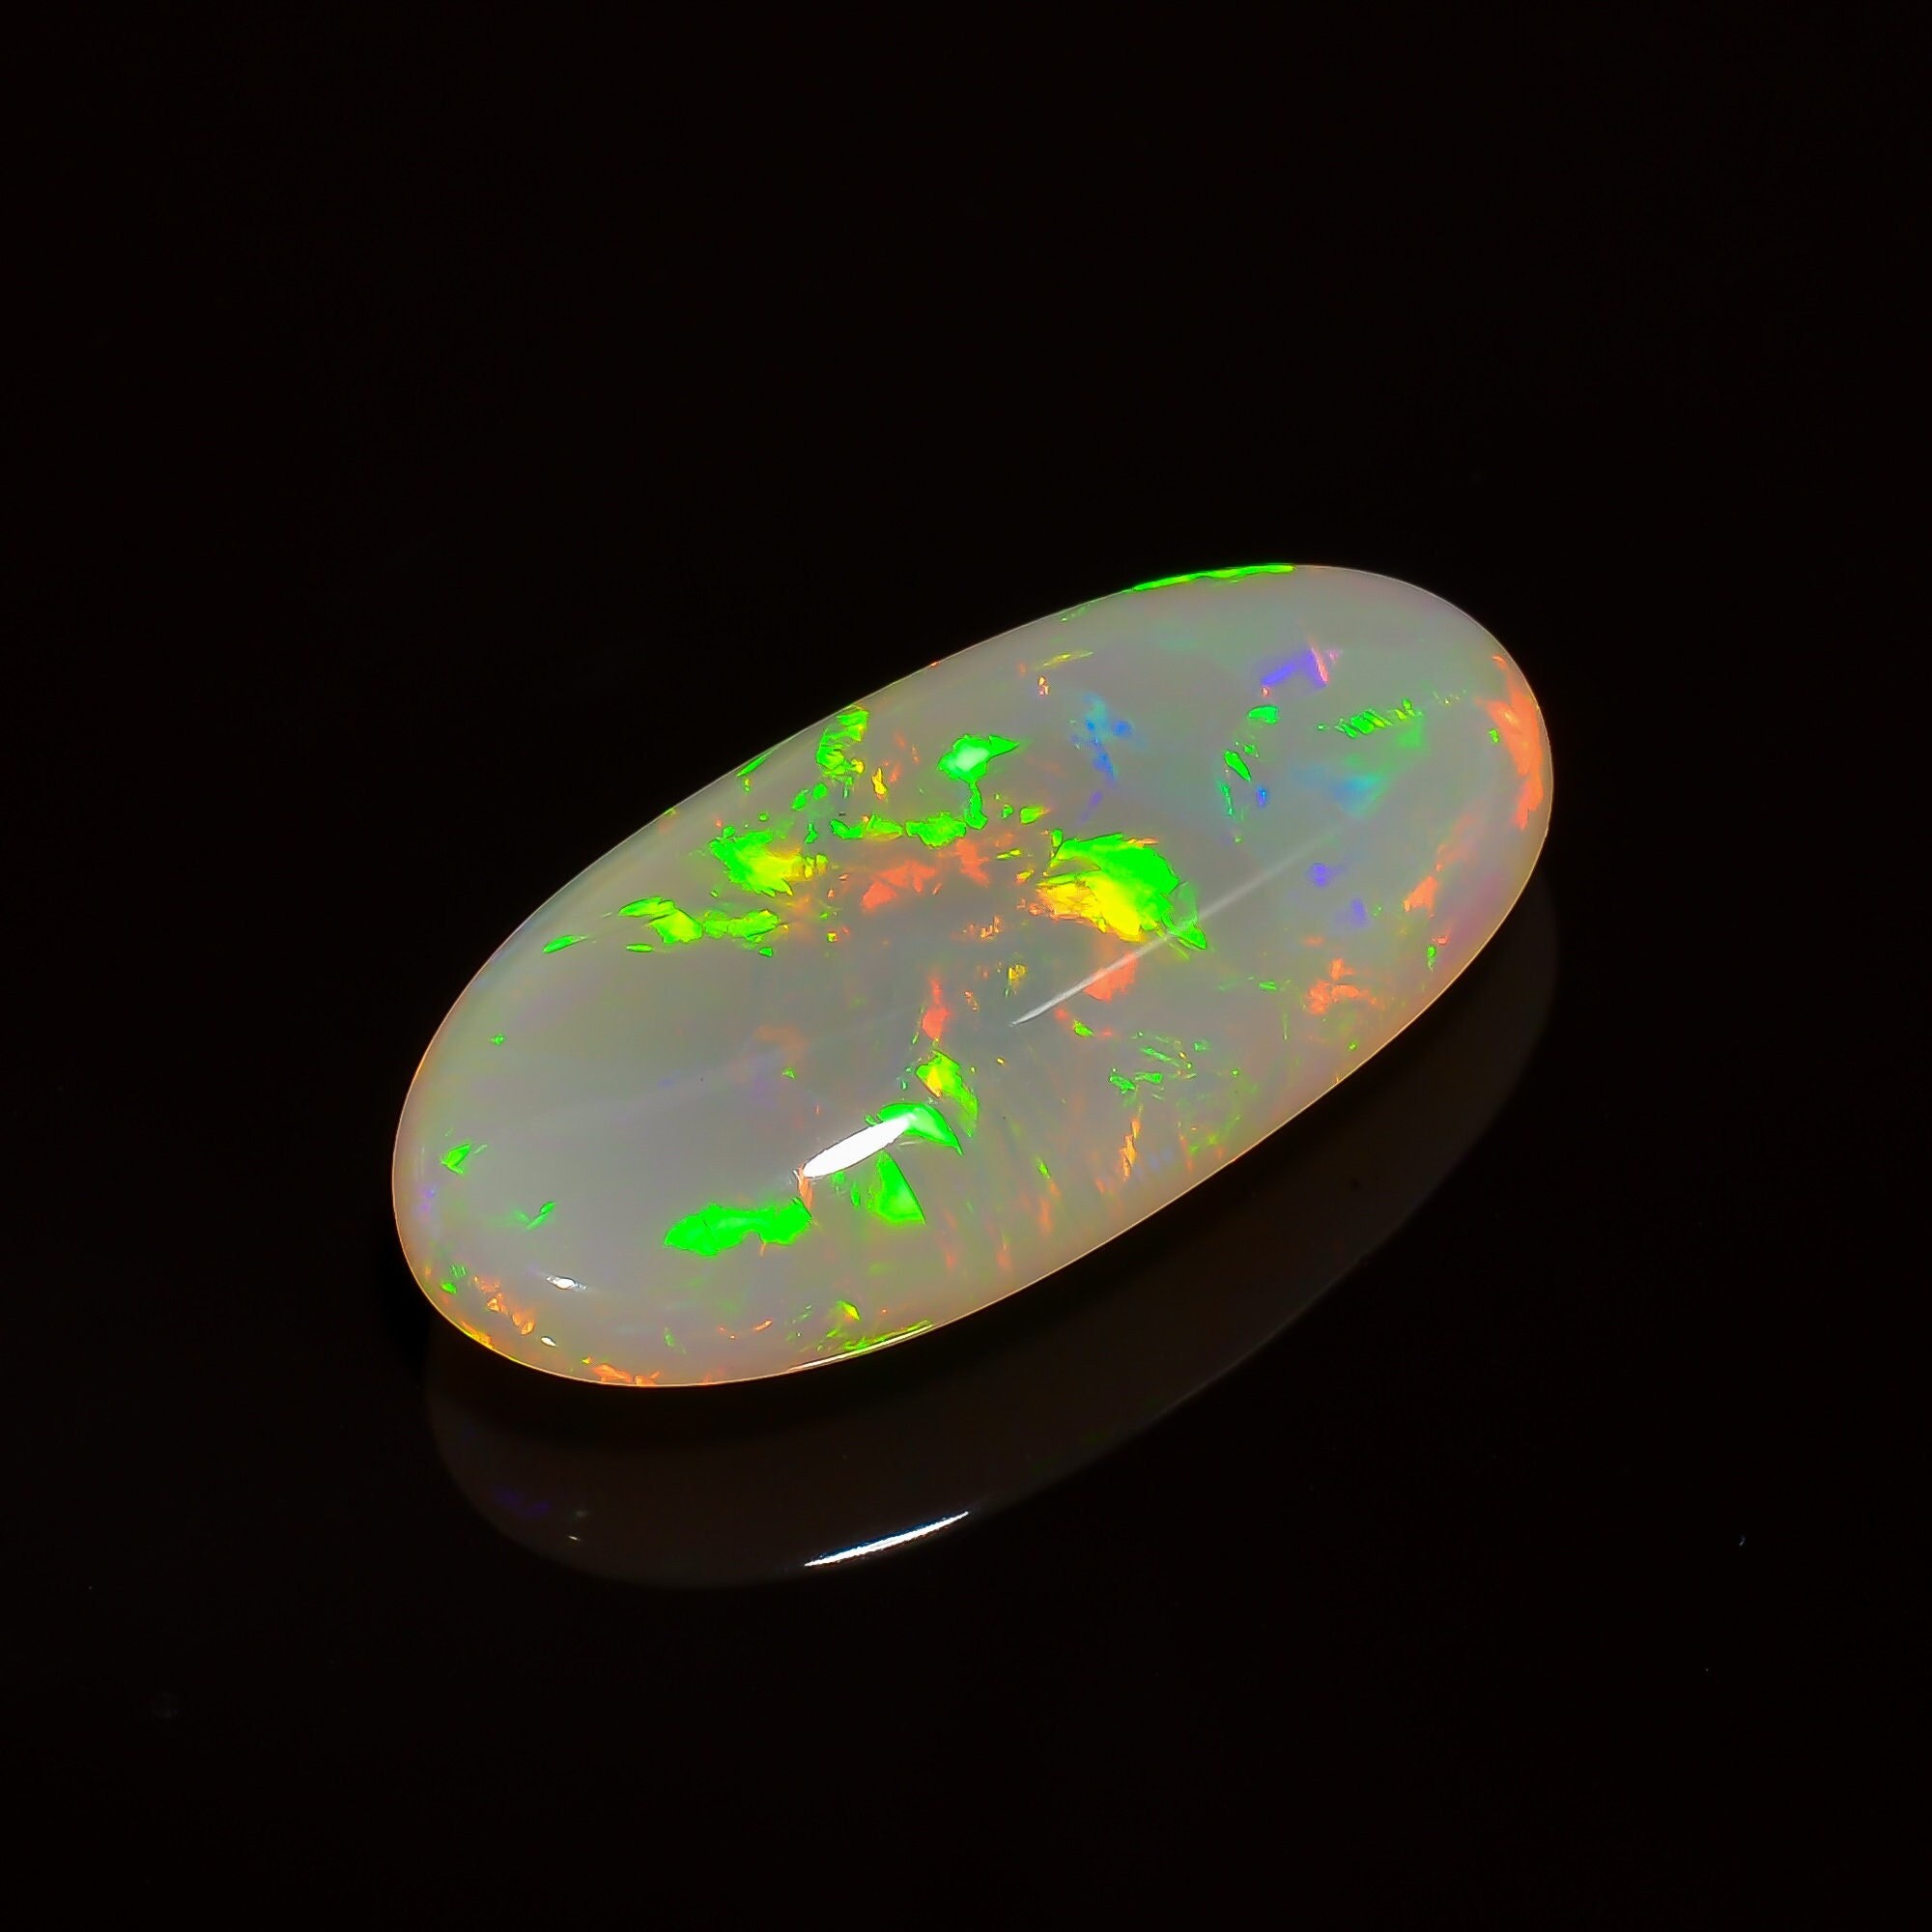 AAA Quality 100% Natural Ethiopian Opal Gemstone Fire Opal Cabochon Size 9X7X4 MM Weight 1.65 crtUse For Making Jewelry.